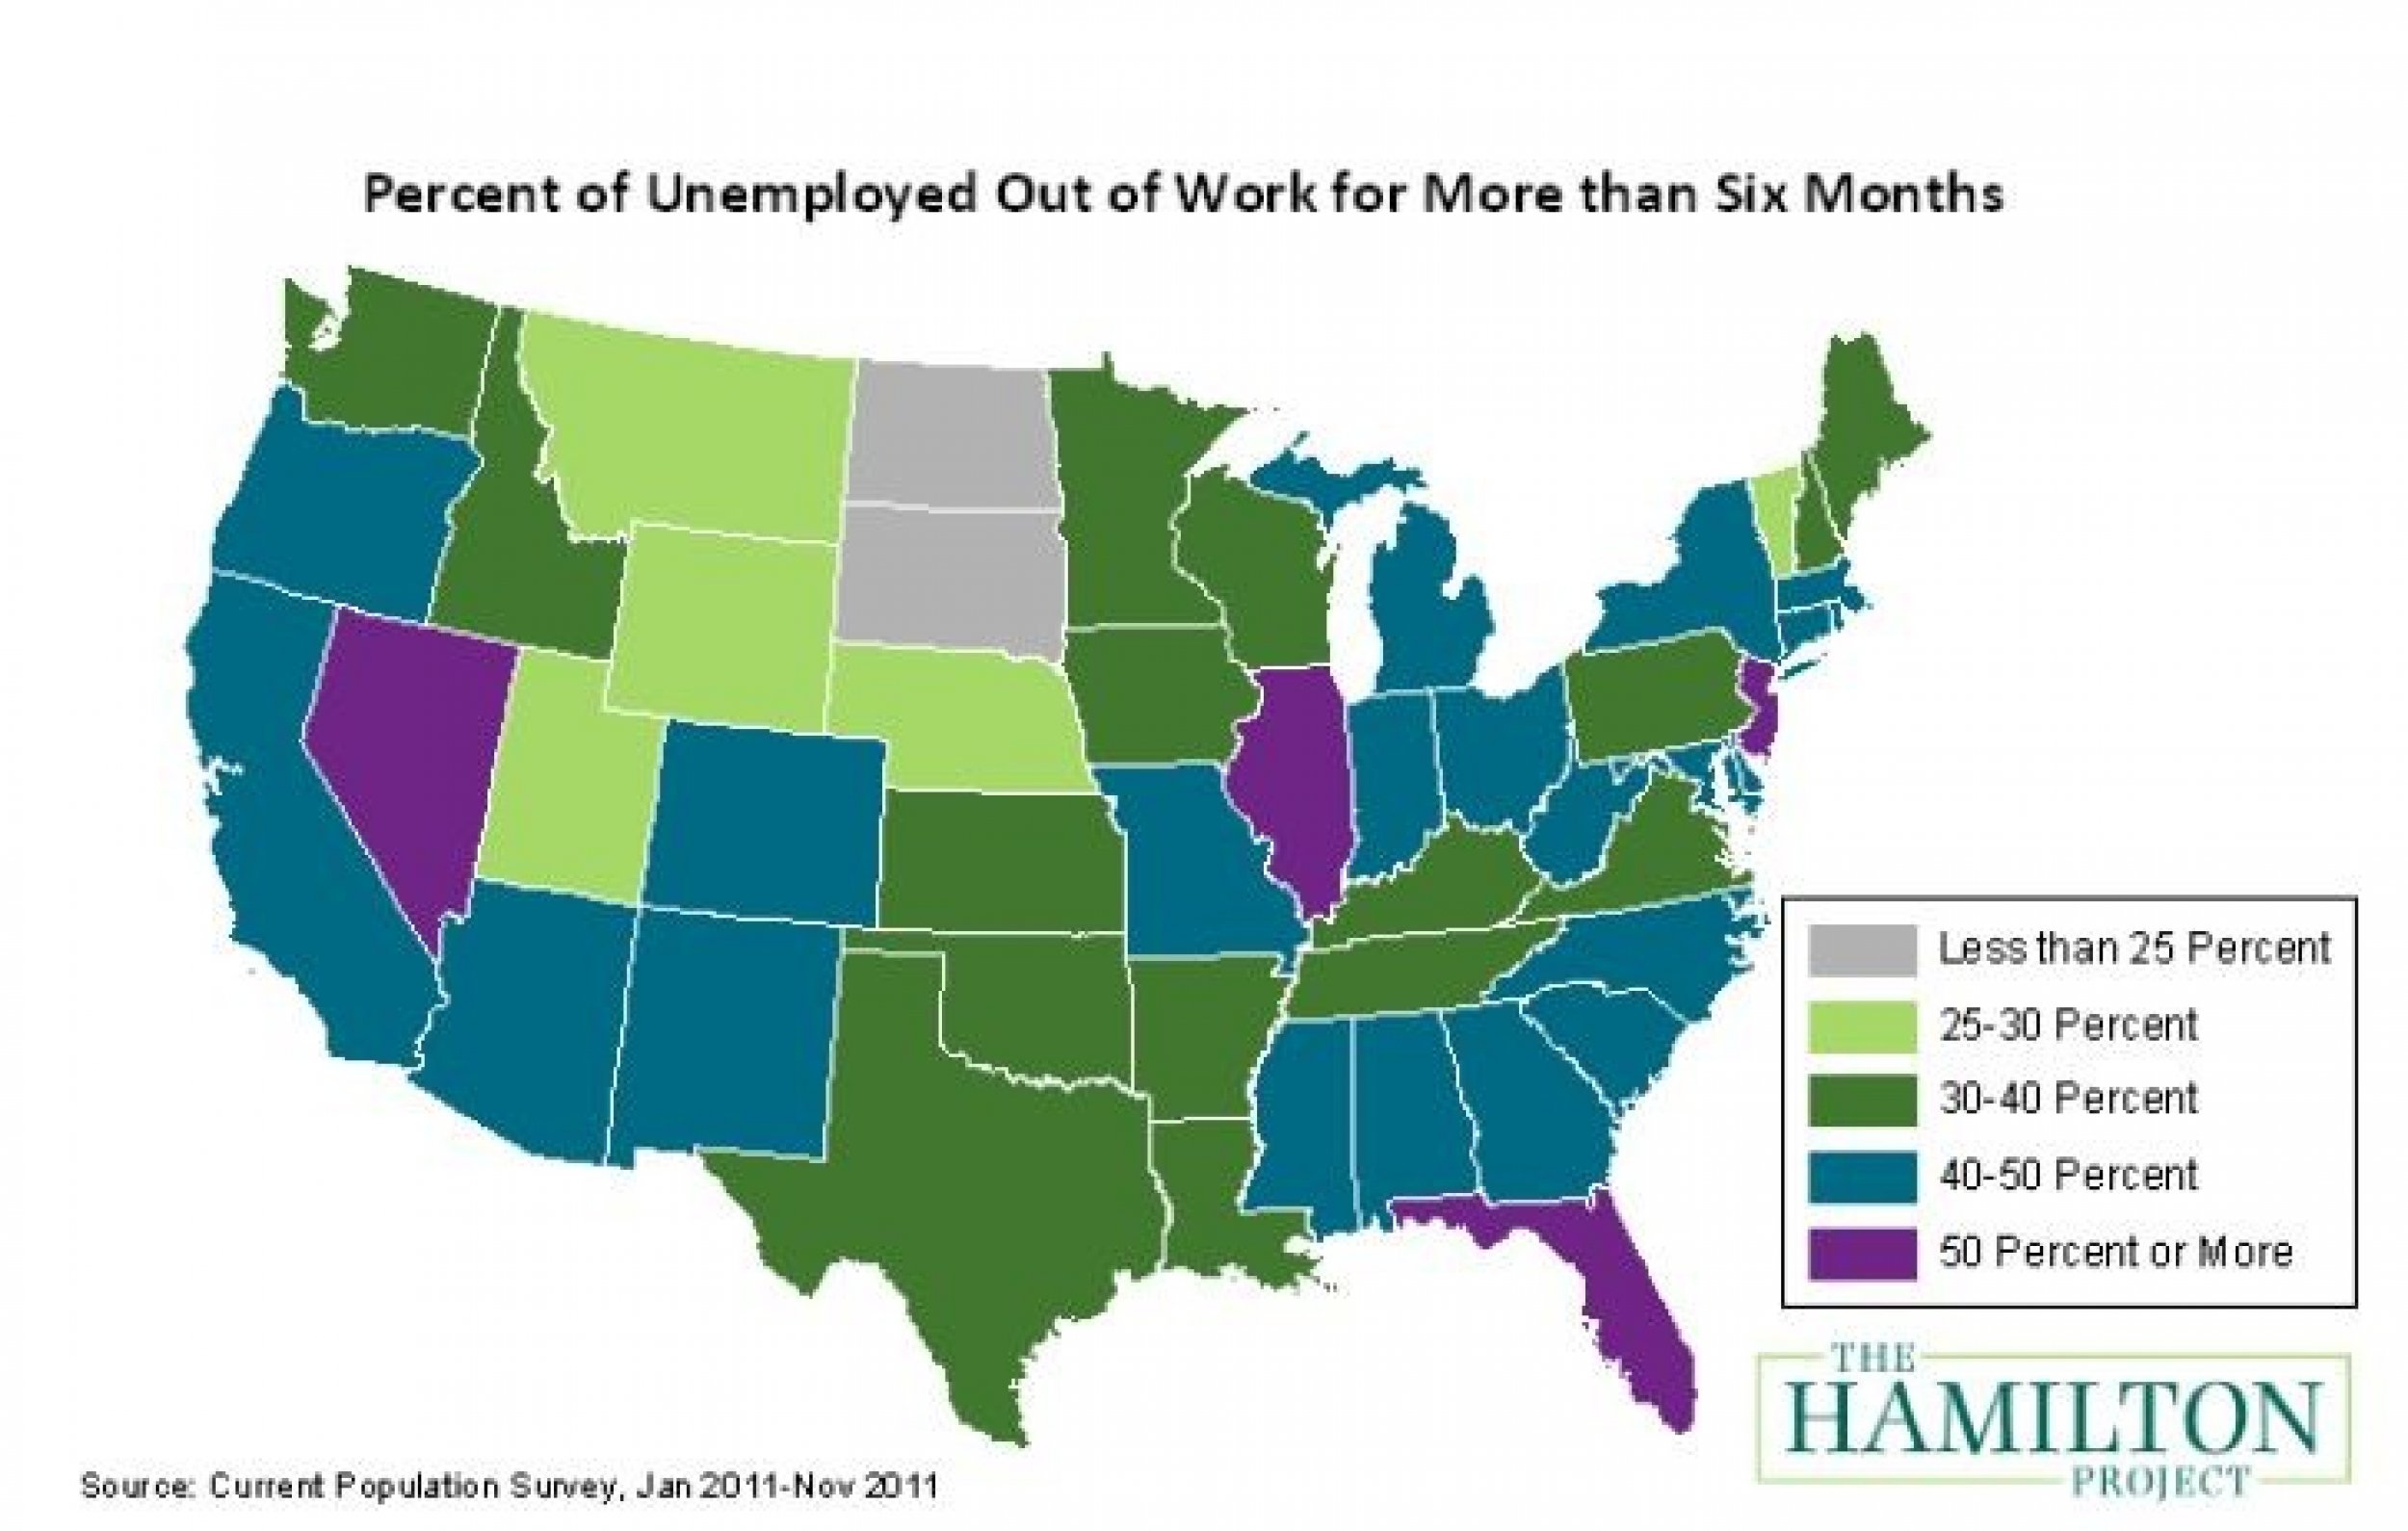 Percent of unemployed out of work for more than six months